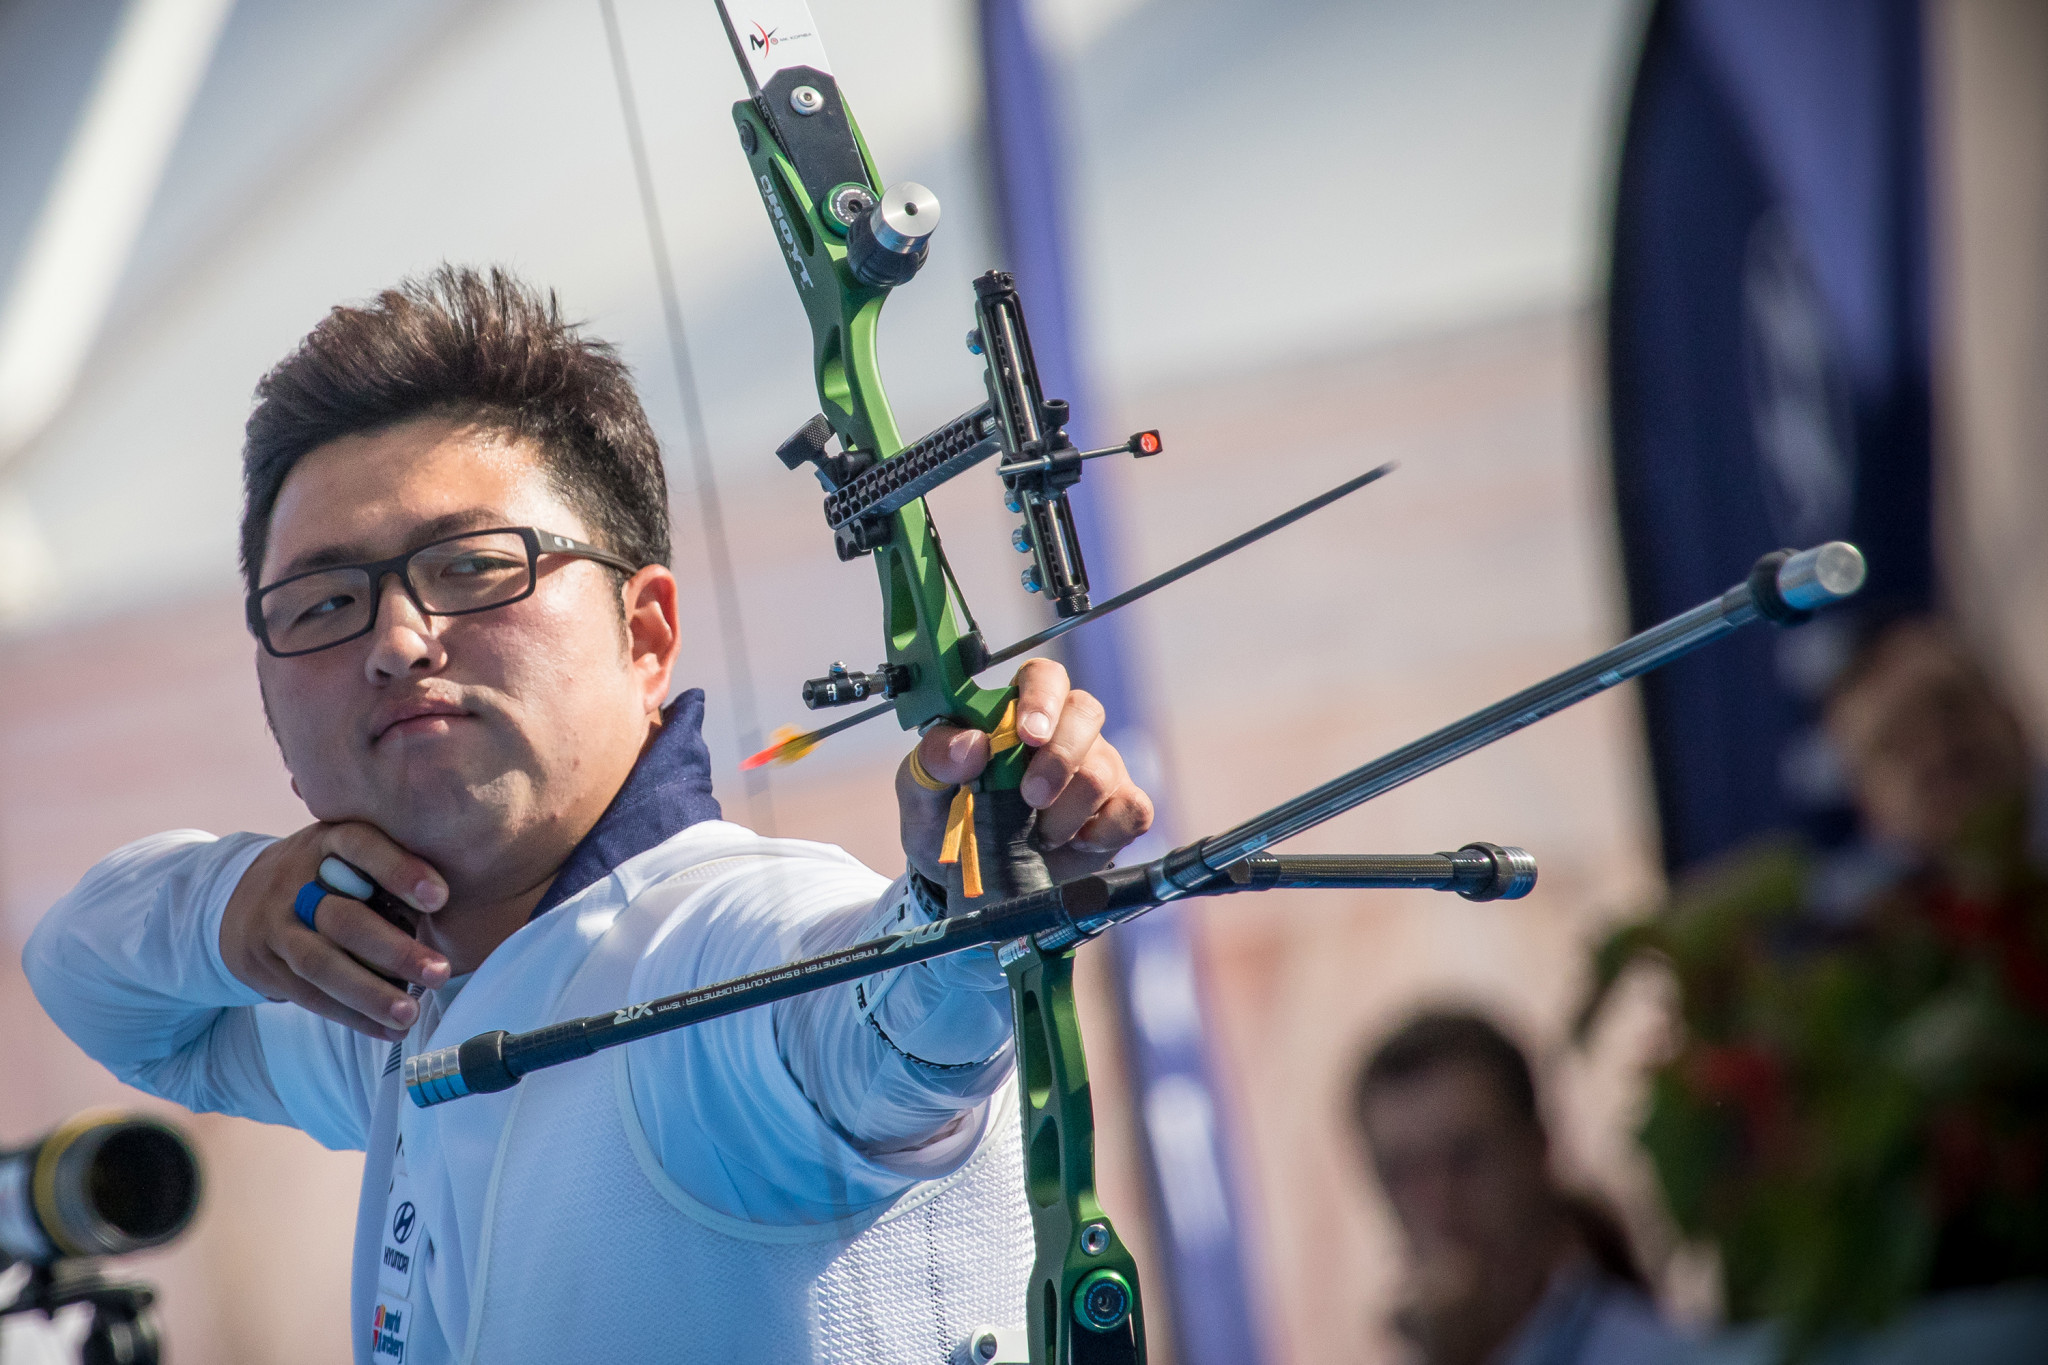 Top two seeds to meet in men's recurve final at Archery World Cup in Antalya